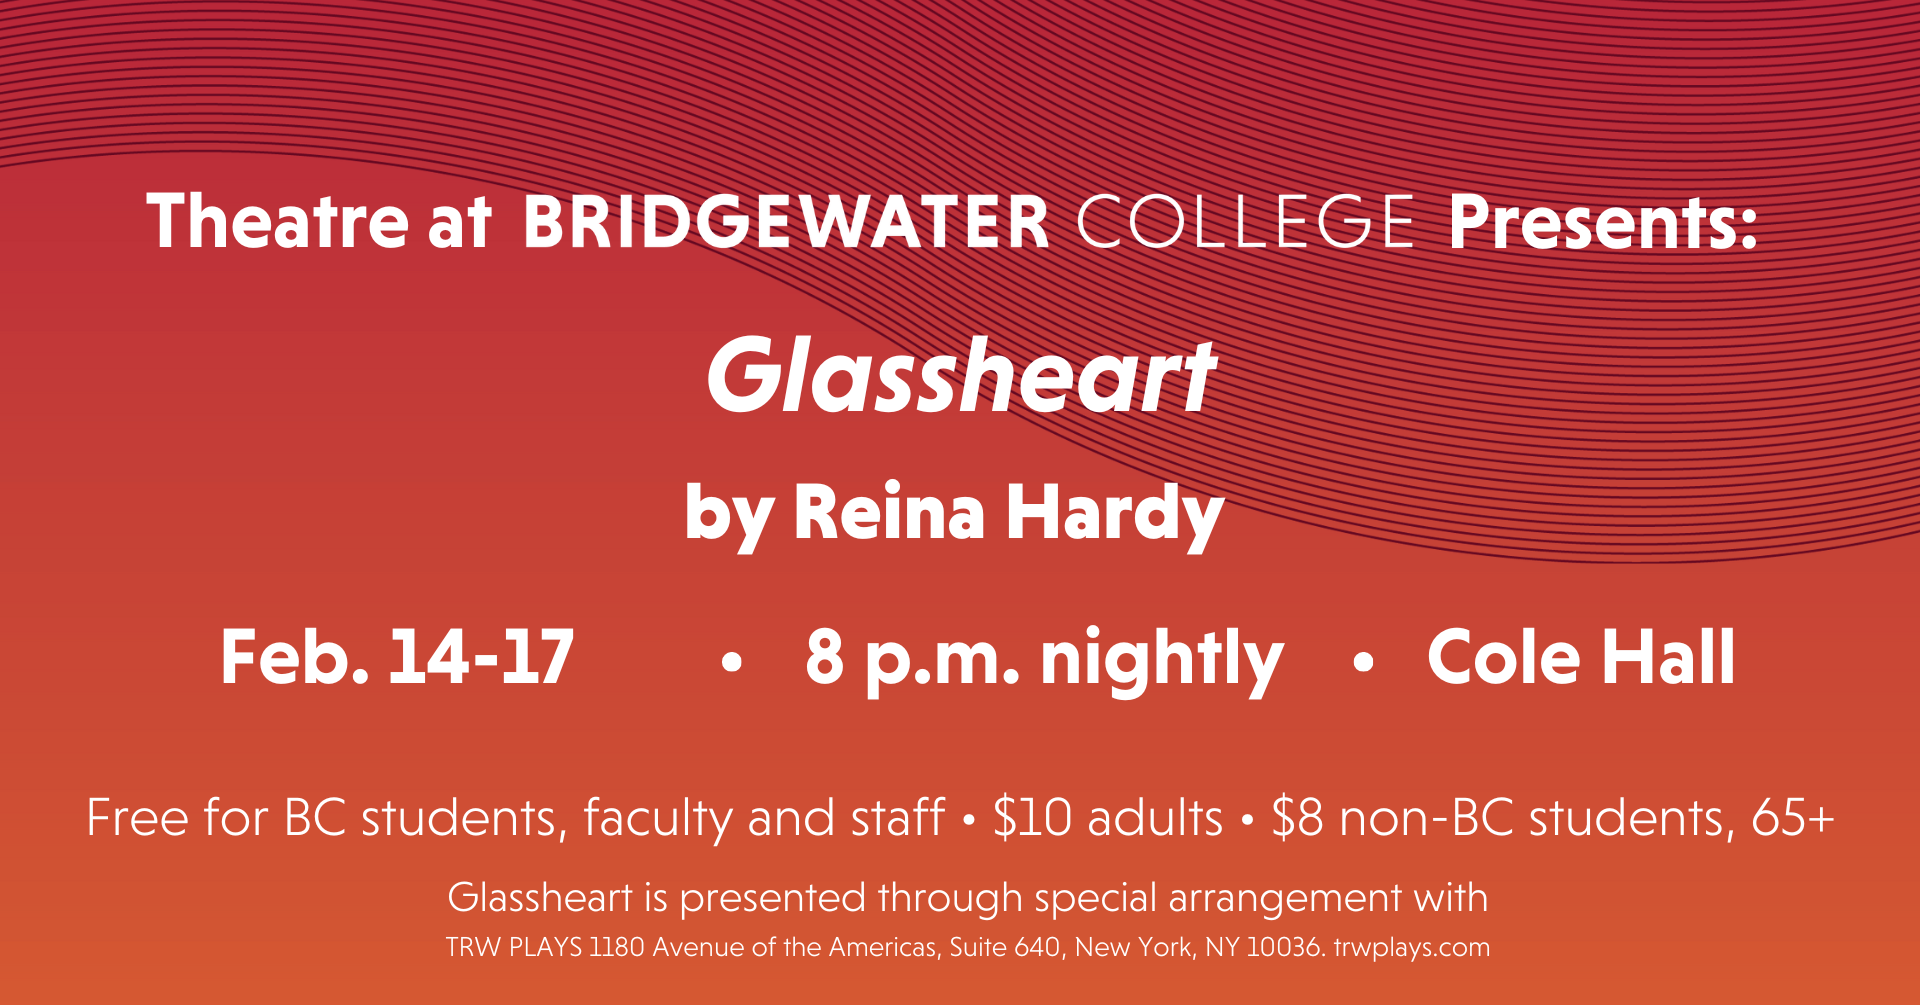 Theatre at Bridgewater College Presents: Glassheart by Reina Hardy. February 14-17. 8 p.m. nightly. Cole Hall. Free for B-C students, faculty, and staff. 10 dollars for adults. 8 dollars for non-B-C students and 65 years or older. Glassheart is presented through special arrangement with T-R-W Plays 1180 Avenue of the Americas, Suite 640, New York, New York 10036. t-r-w-plays.com